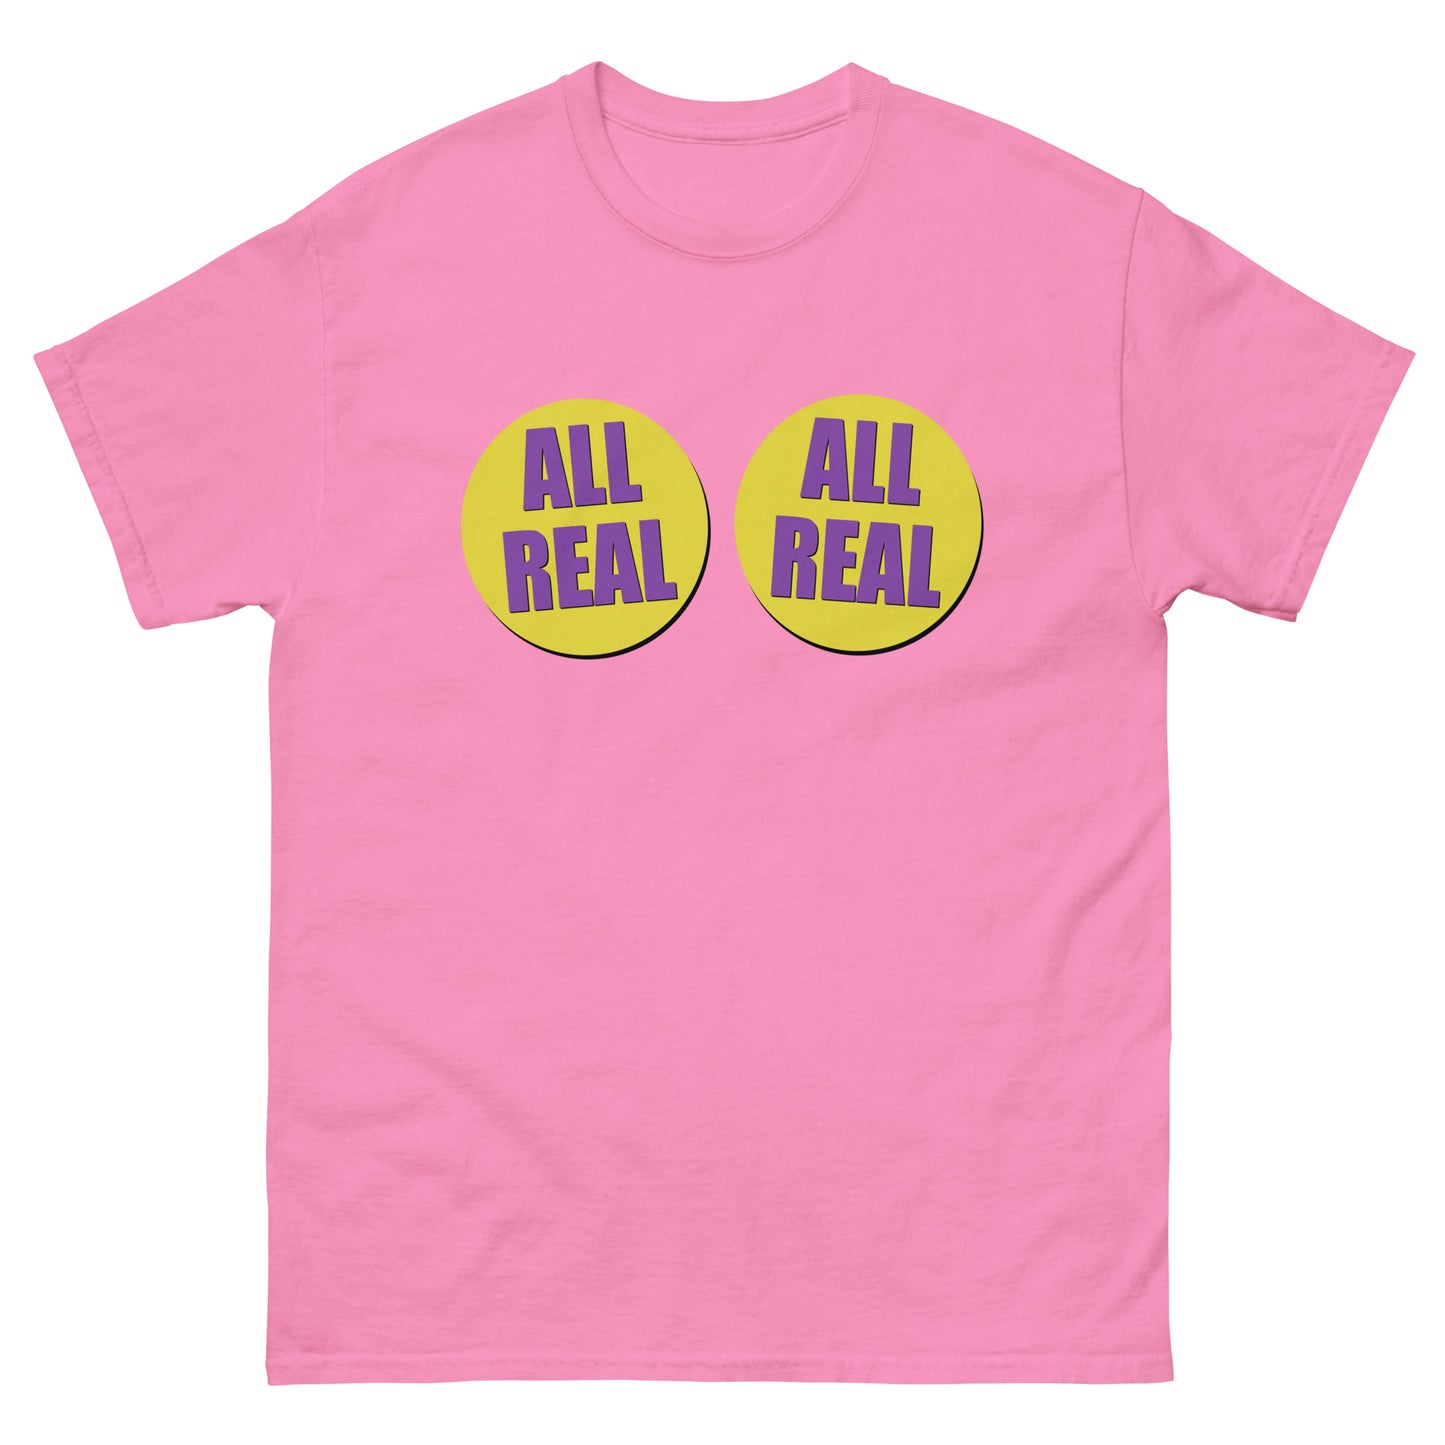 ALL REAL t-shirt